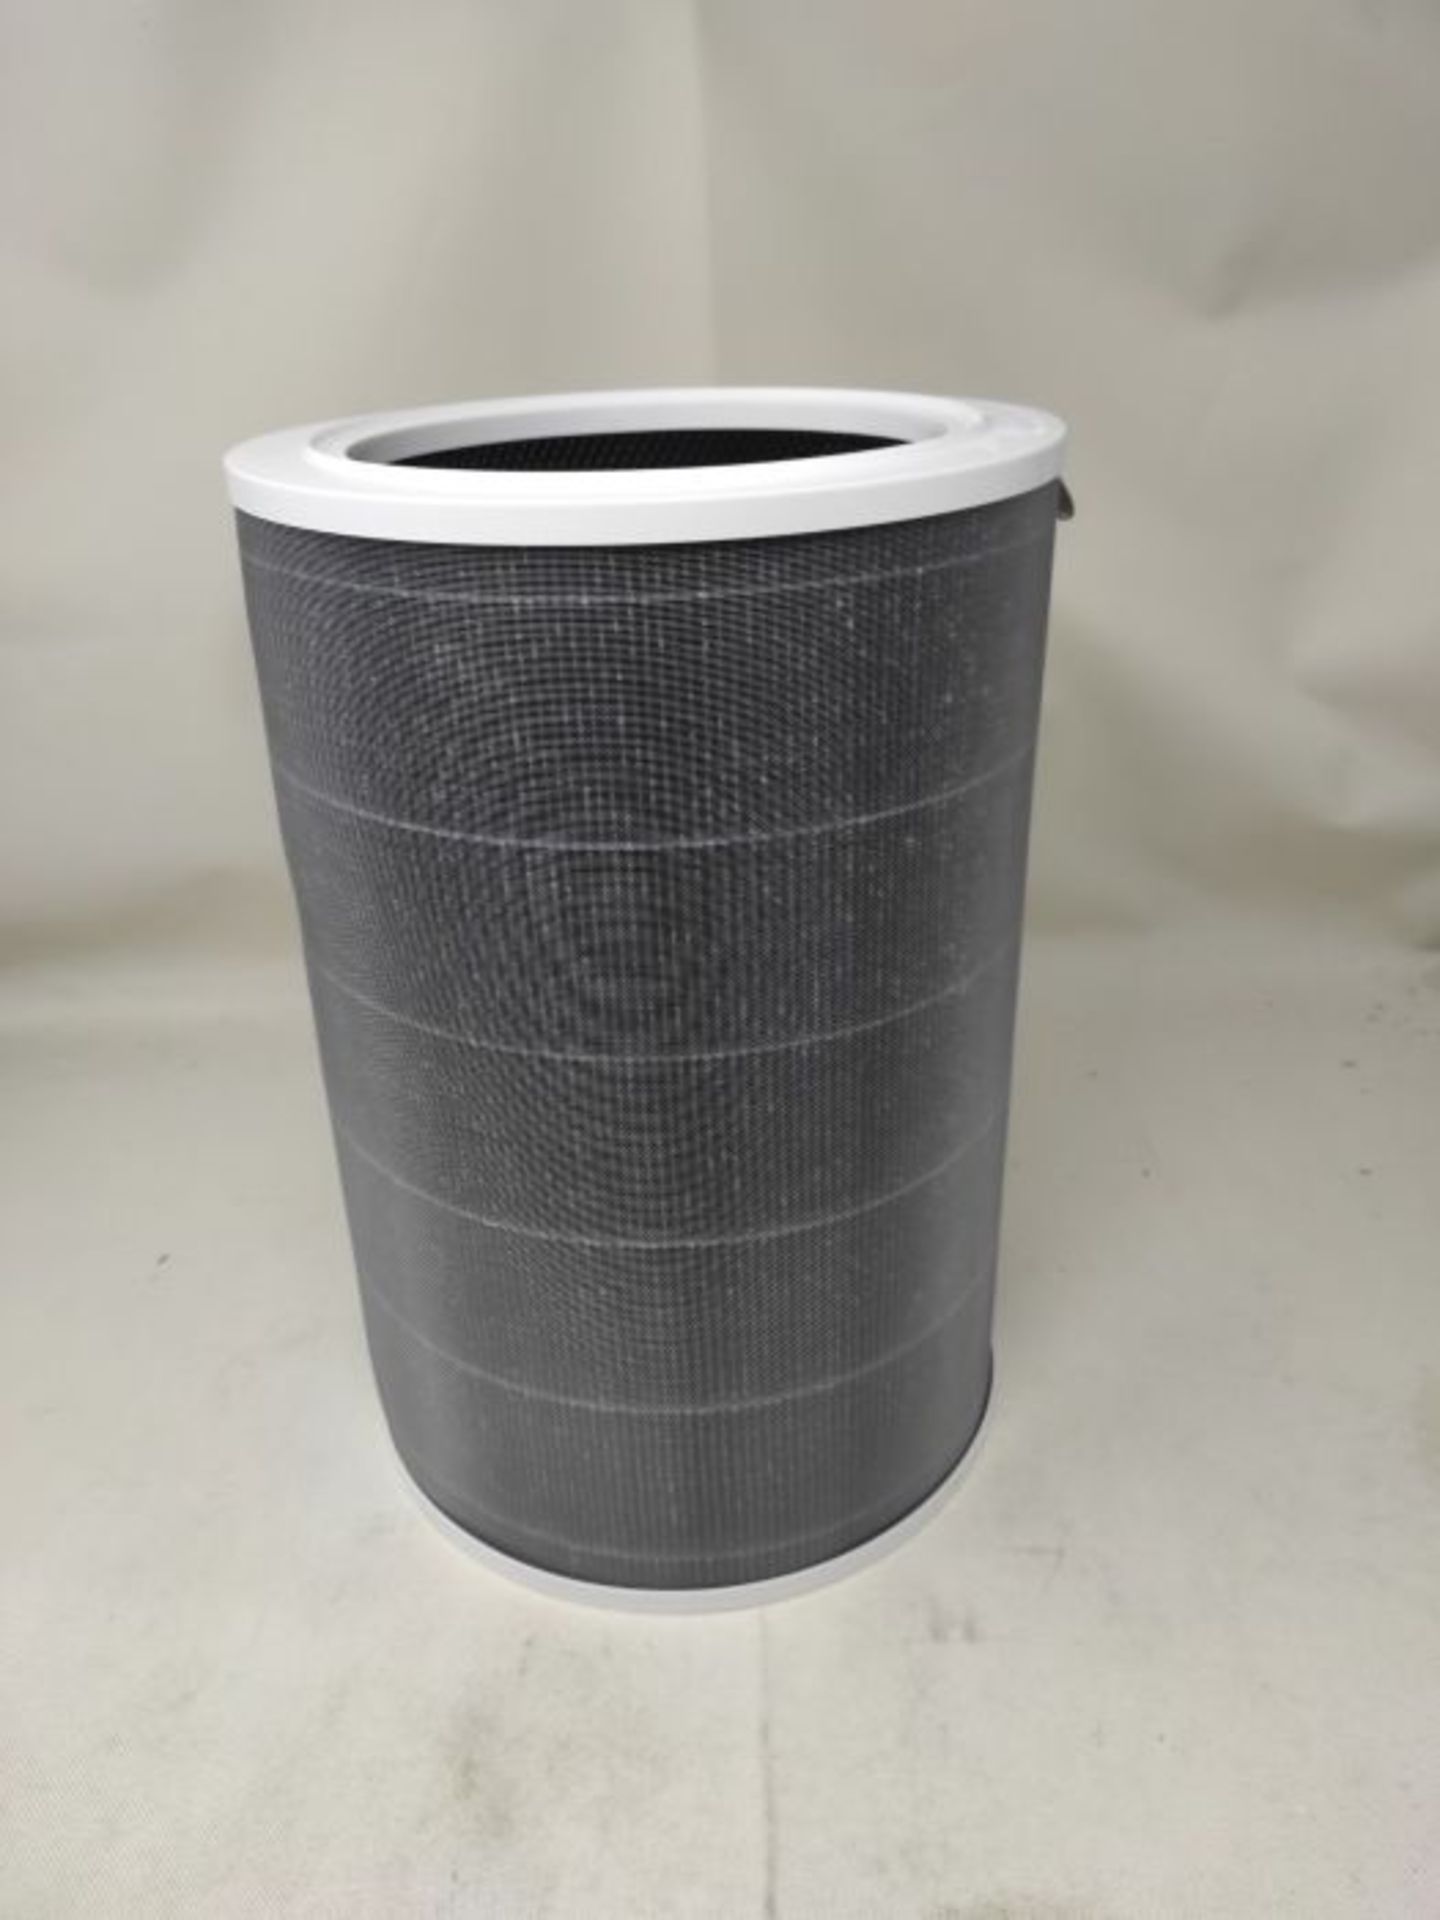 Xiaomi HEPA Filter for Air Purifier, Eliminates 99.97% Particles Small As 0.3 Micro, C - Image 3 of 3